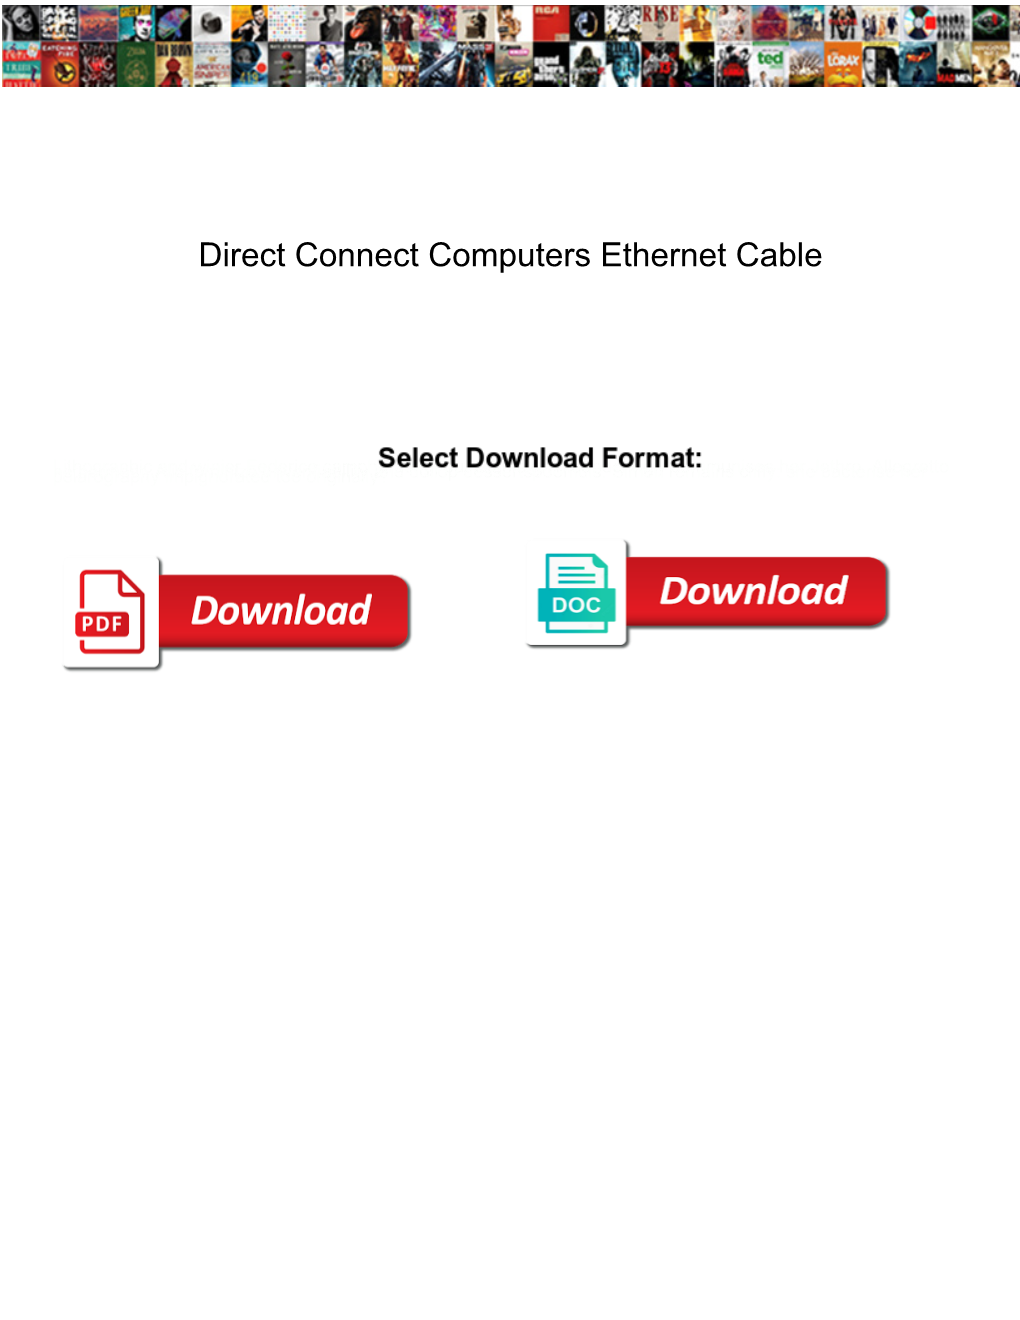 Direct Connect Computers Ethernet Cable